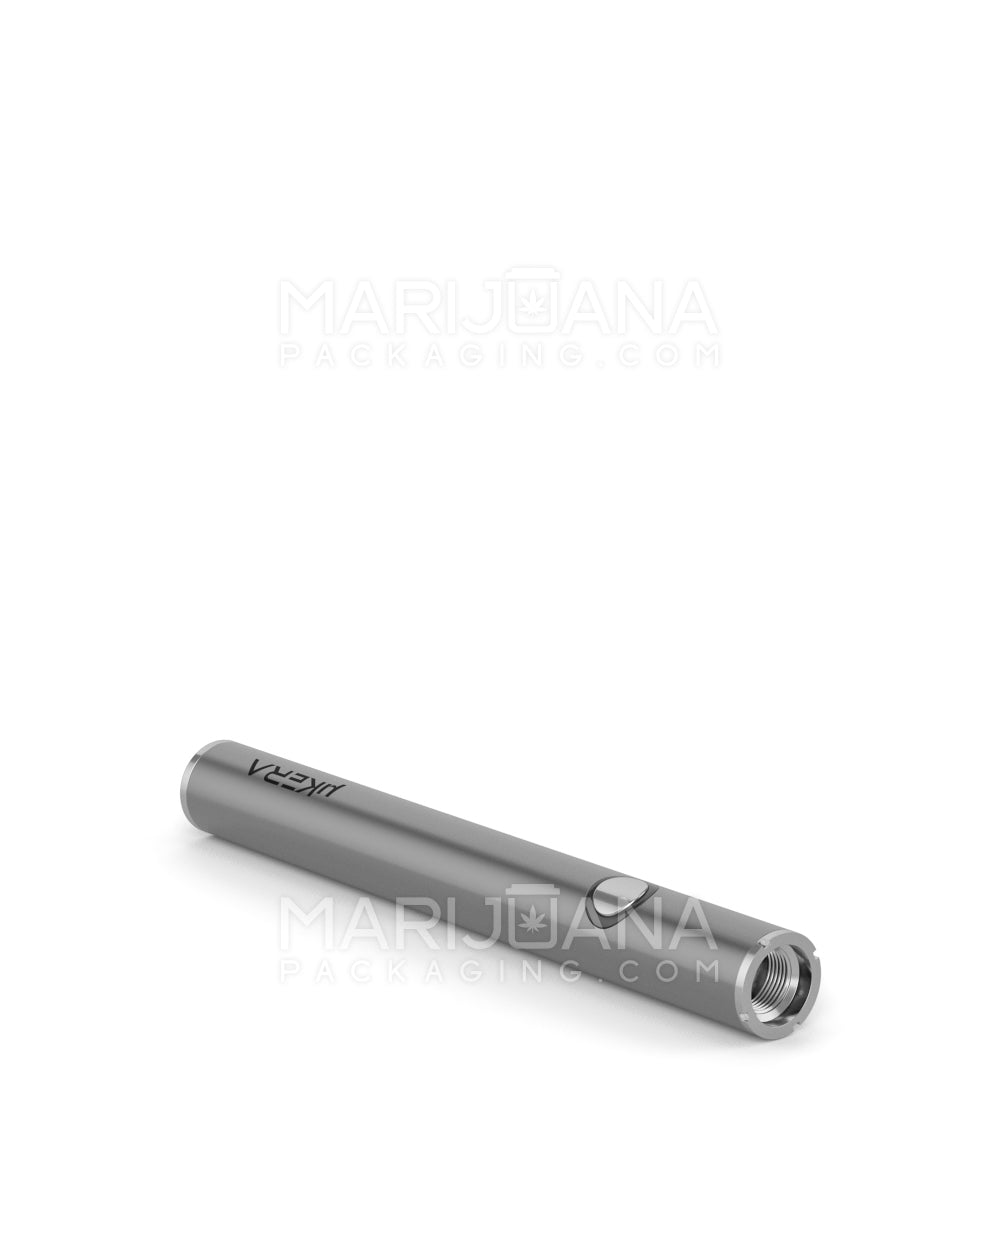 Variable Voltage Vape Battery | 320mAh - Silver - 80 Count - 5